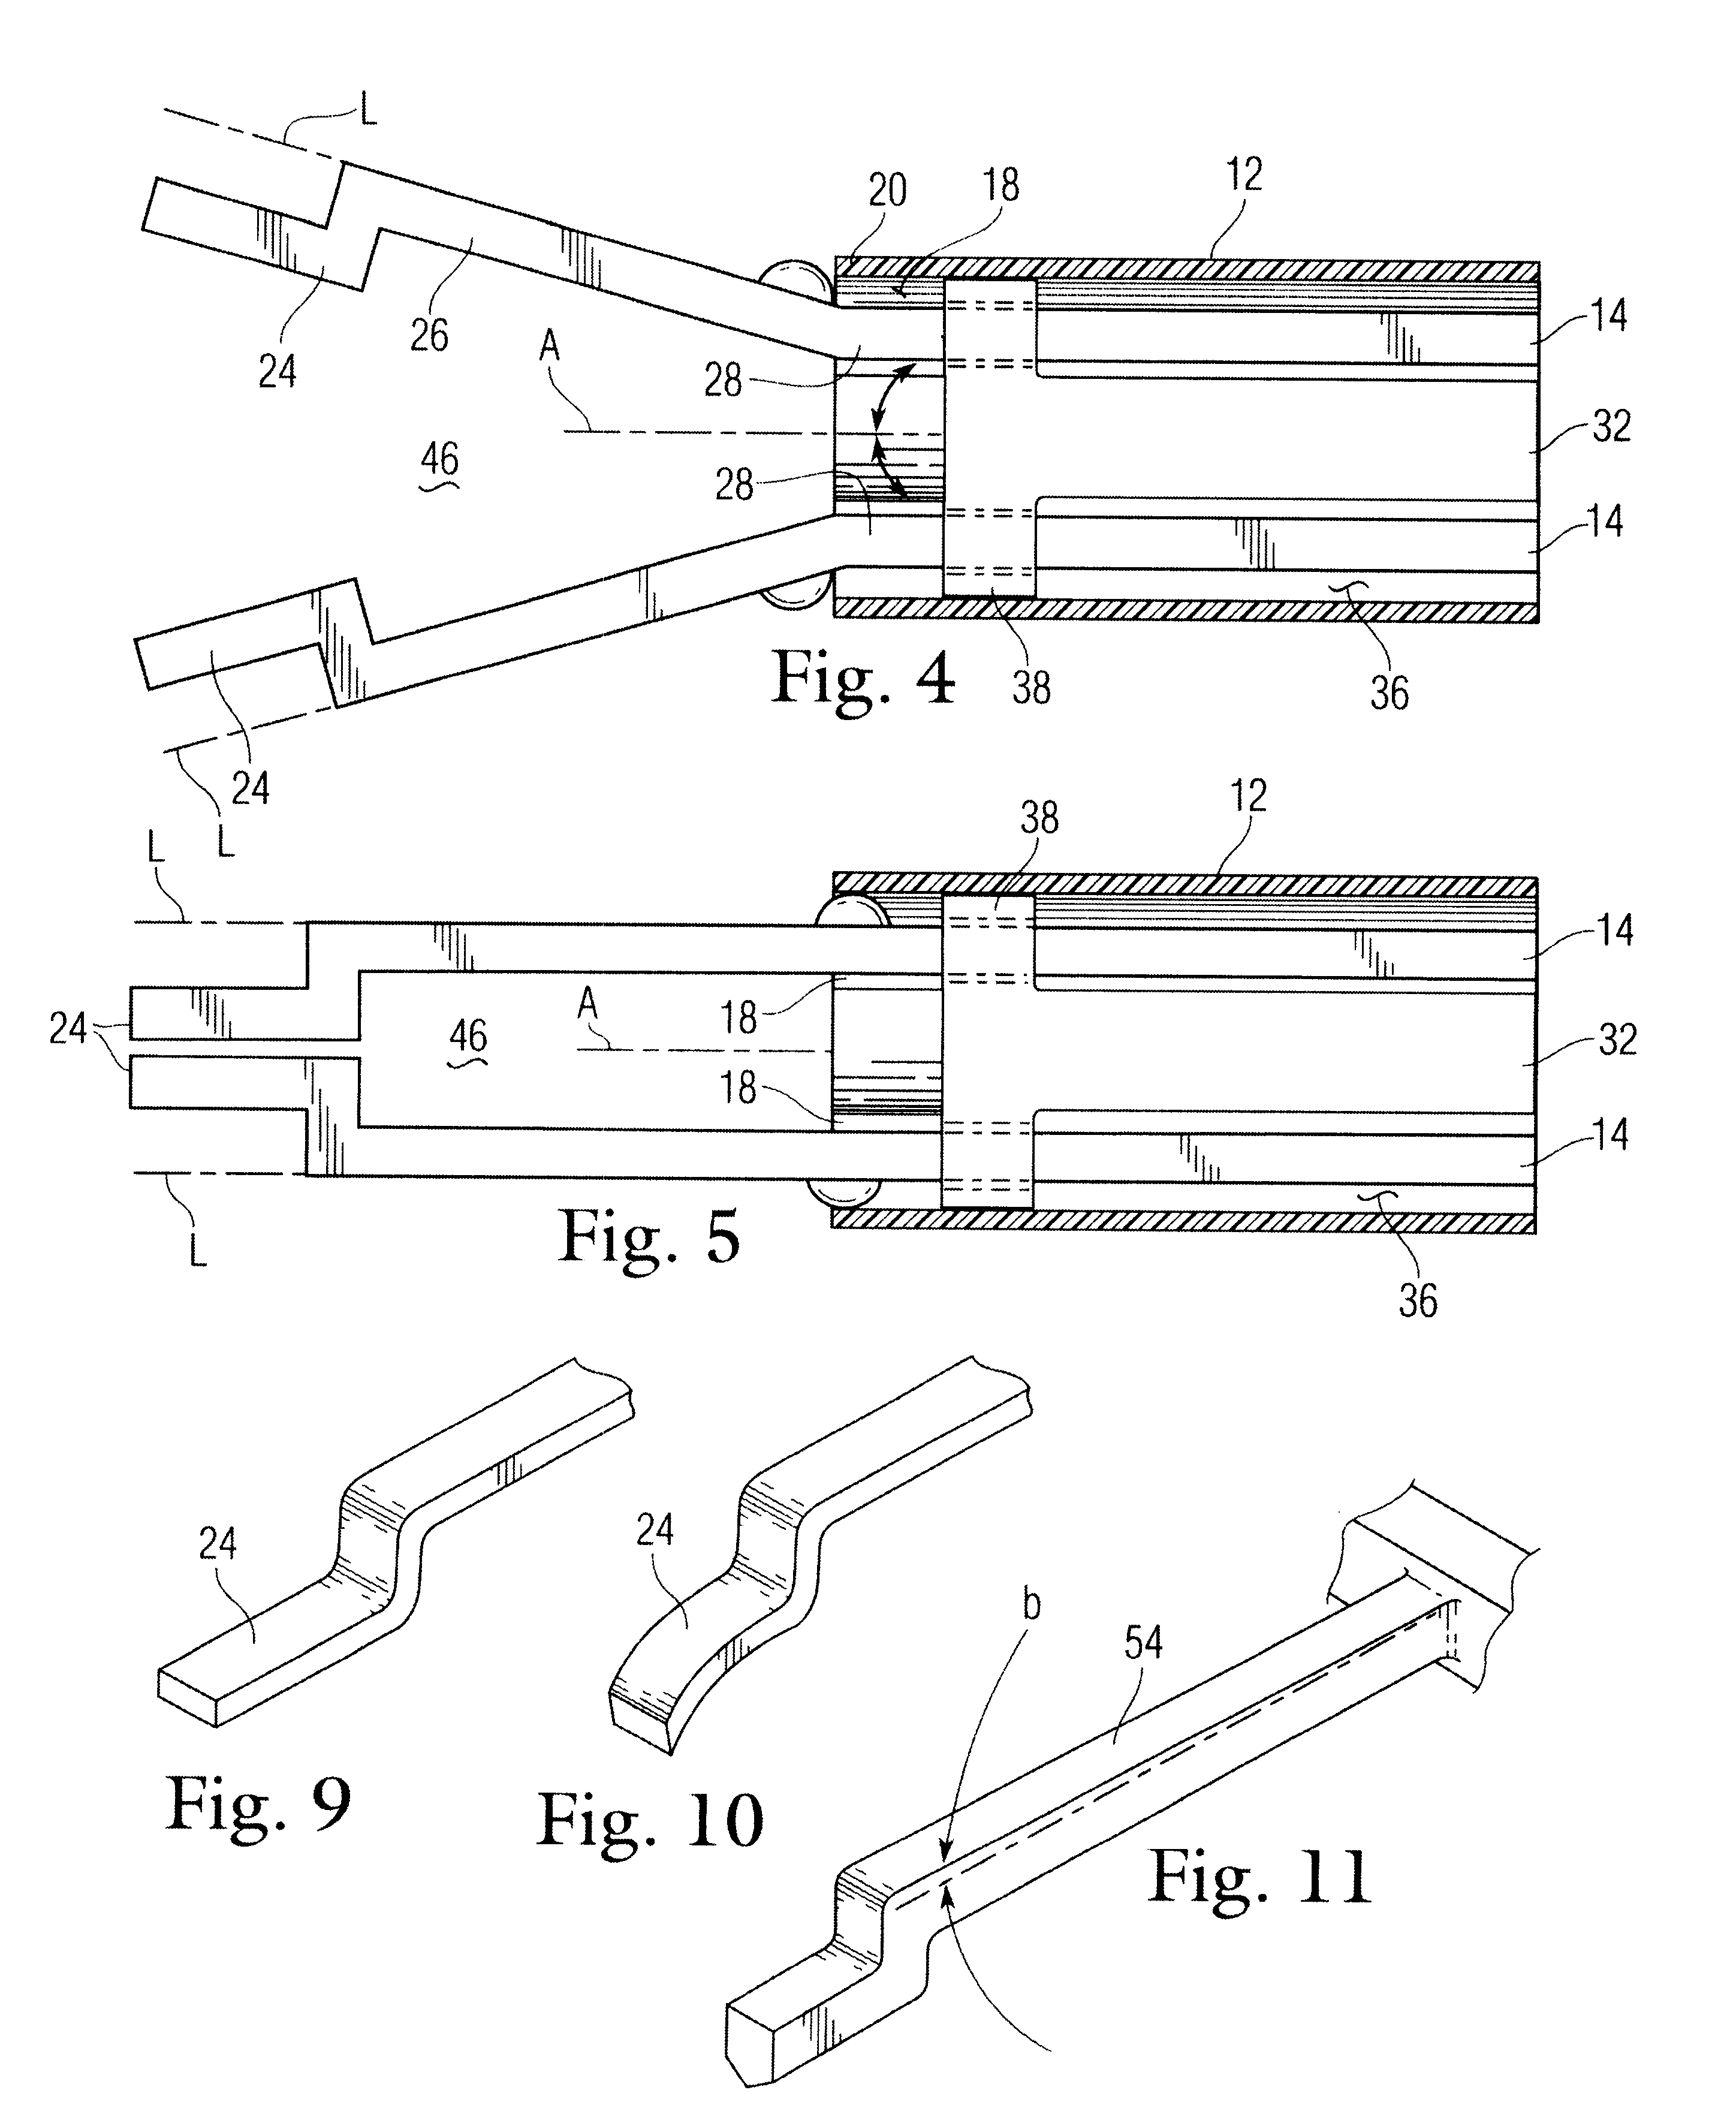 Occlusion apparatus and method for necrotizing anatomical tissue structures